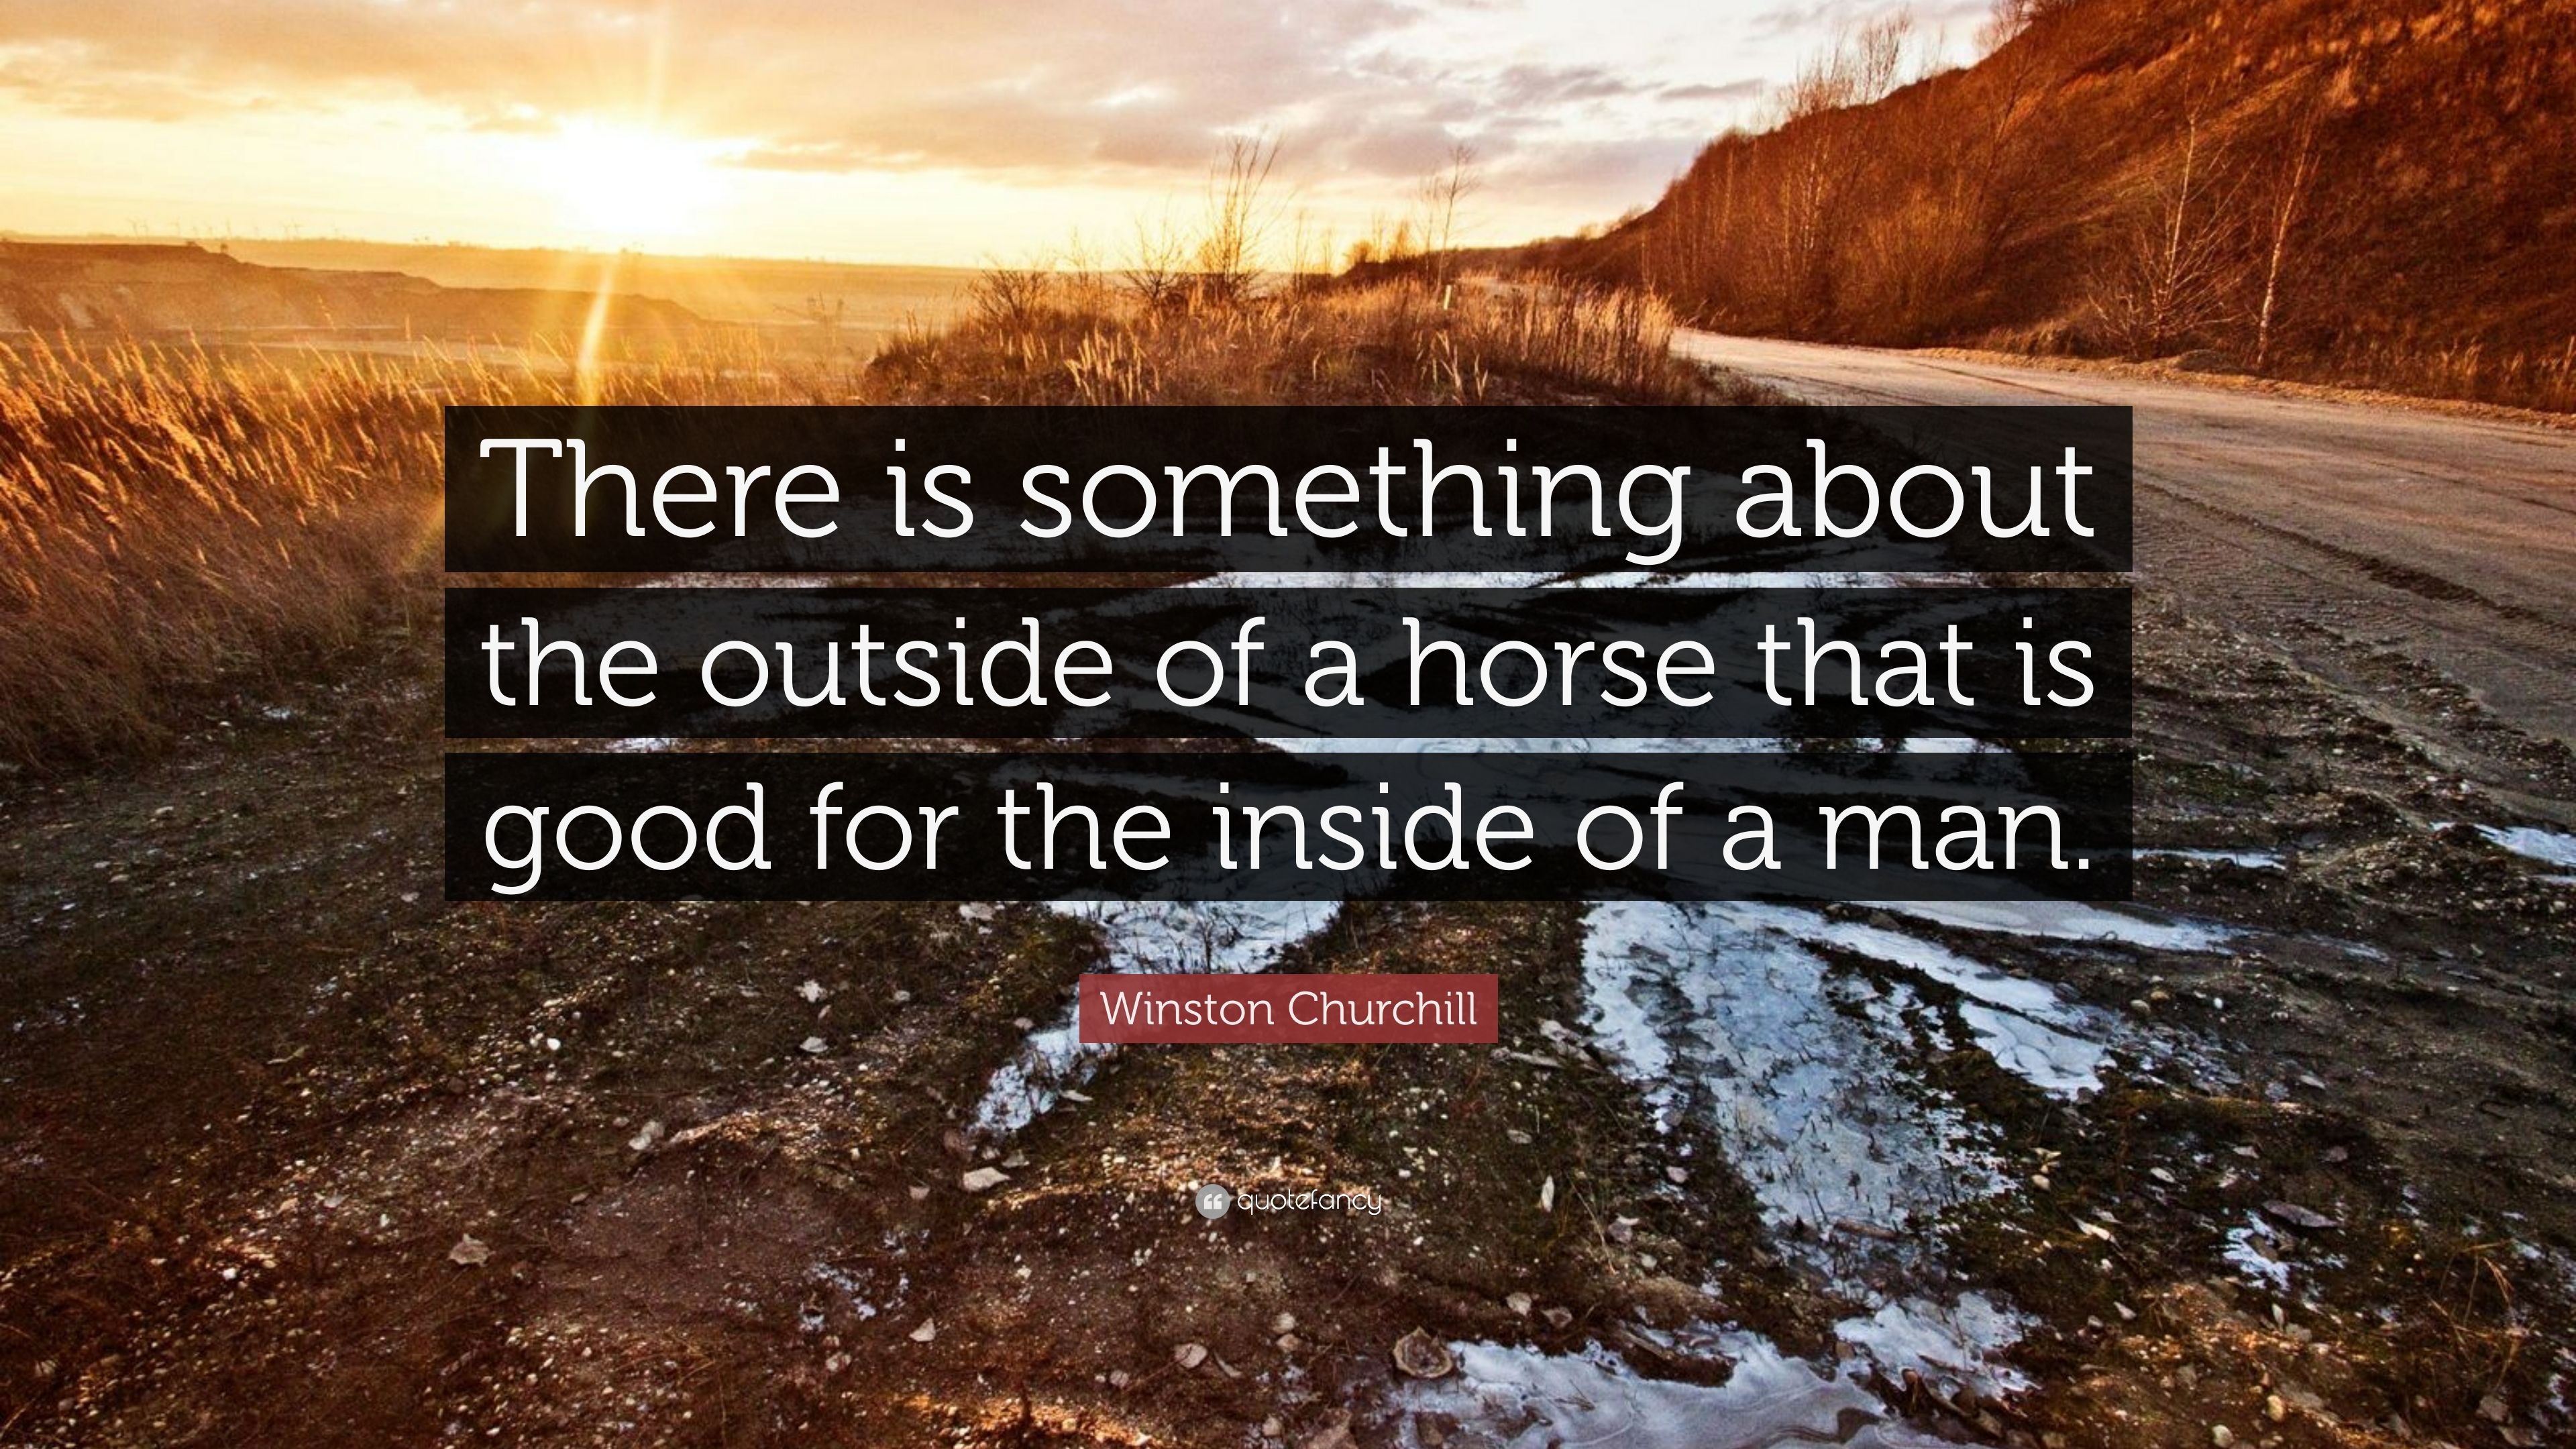 Winston Churchill Quote: “There is something about the outside